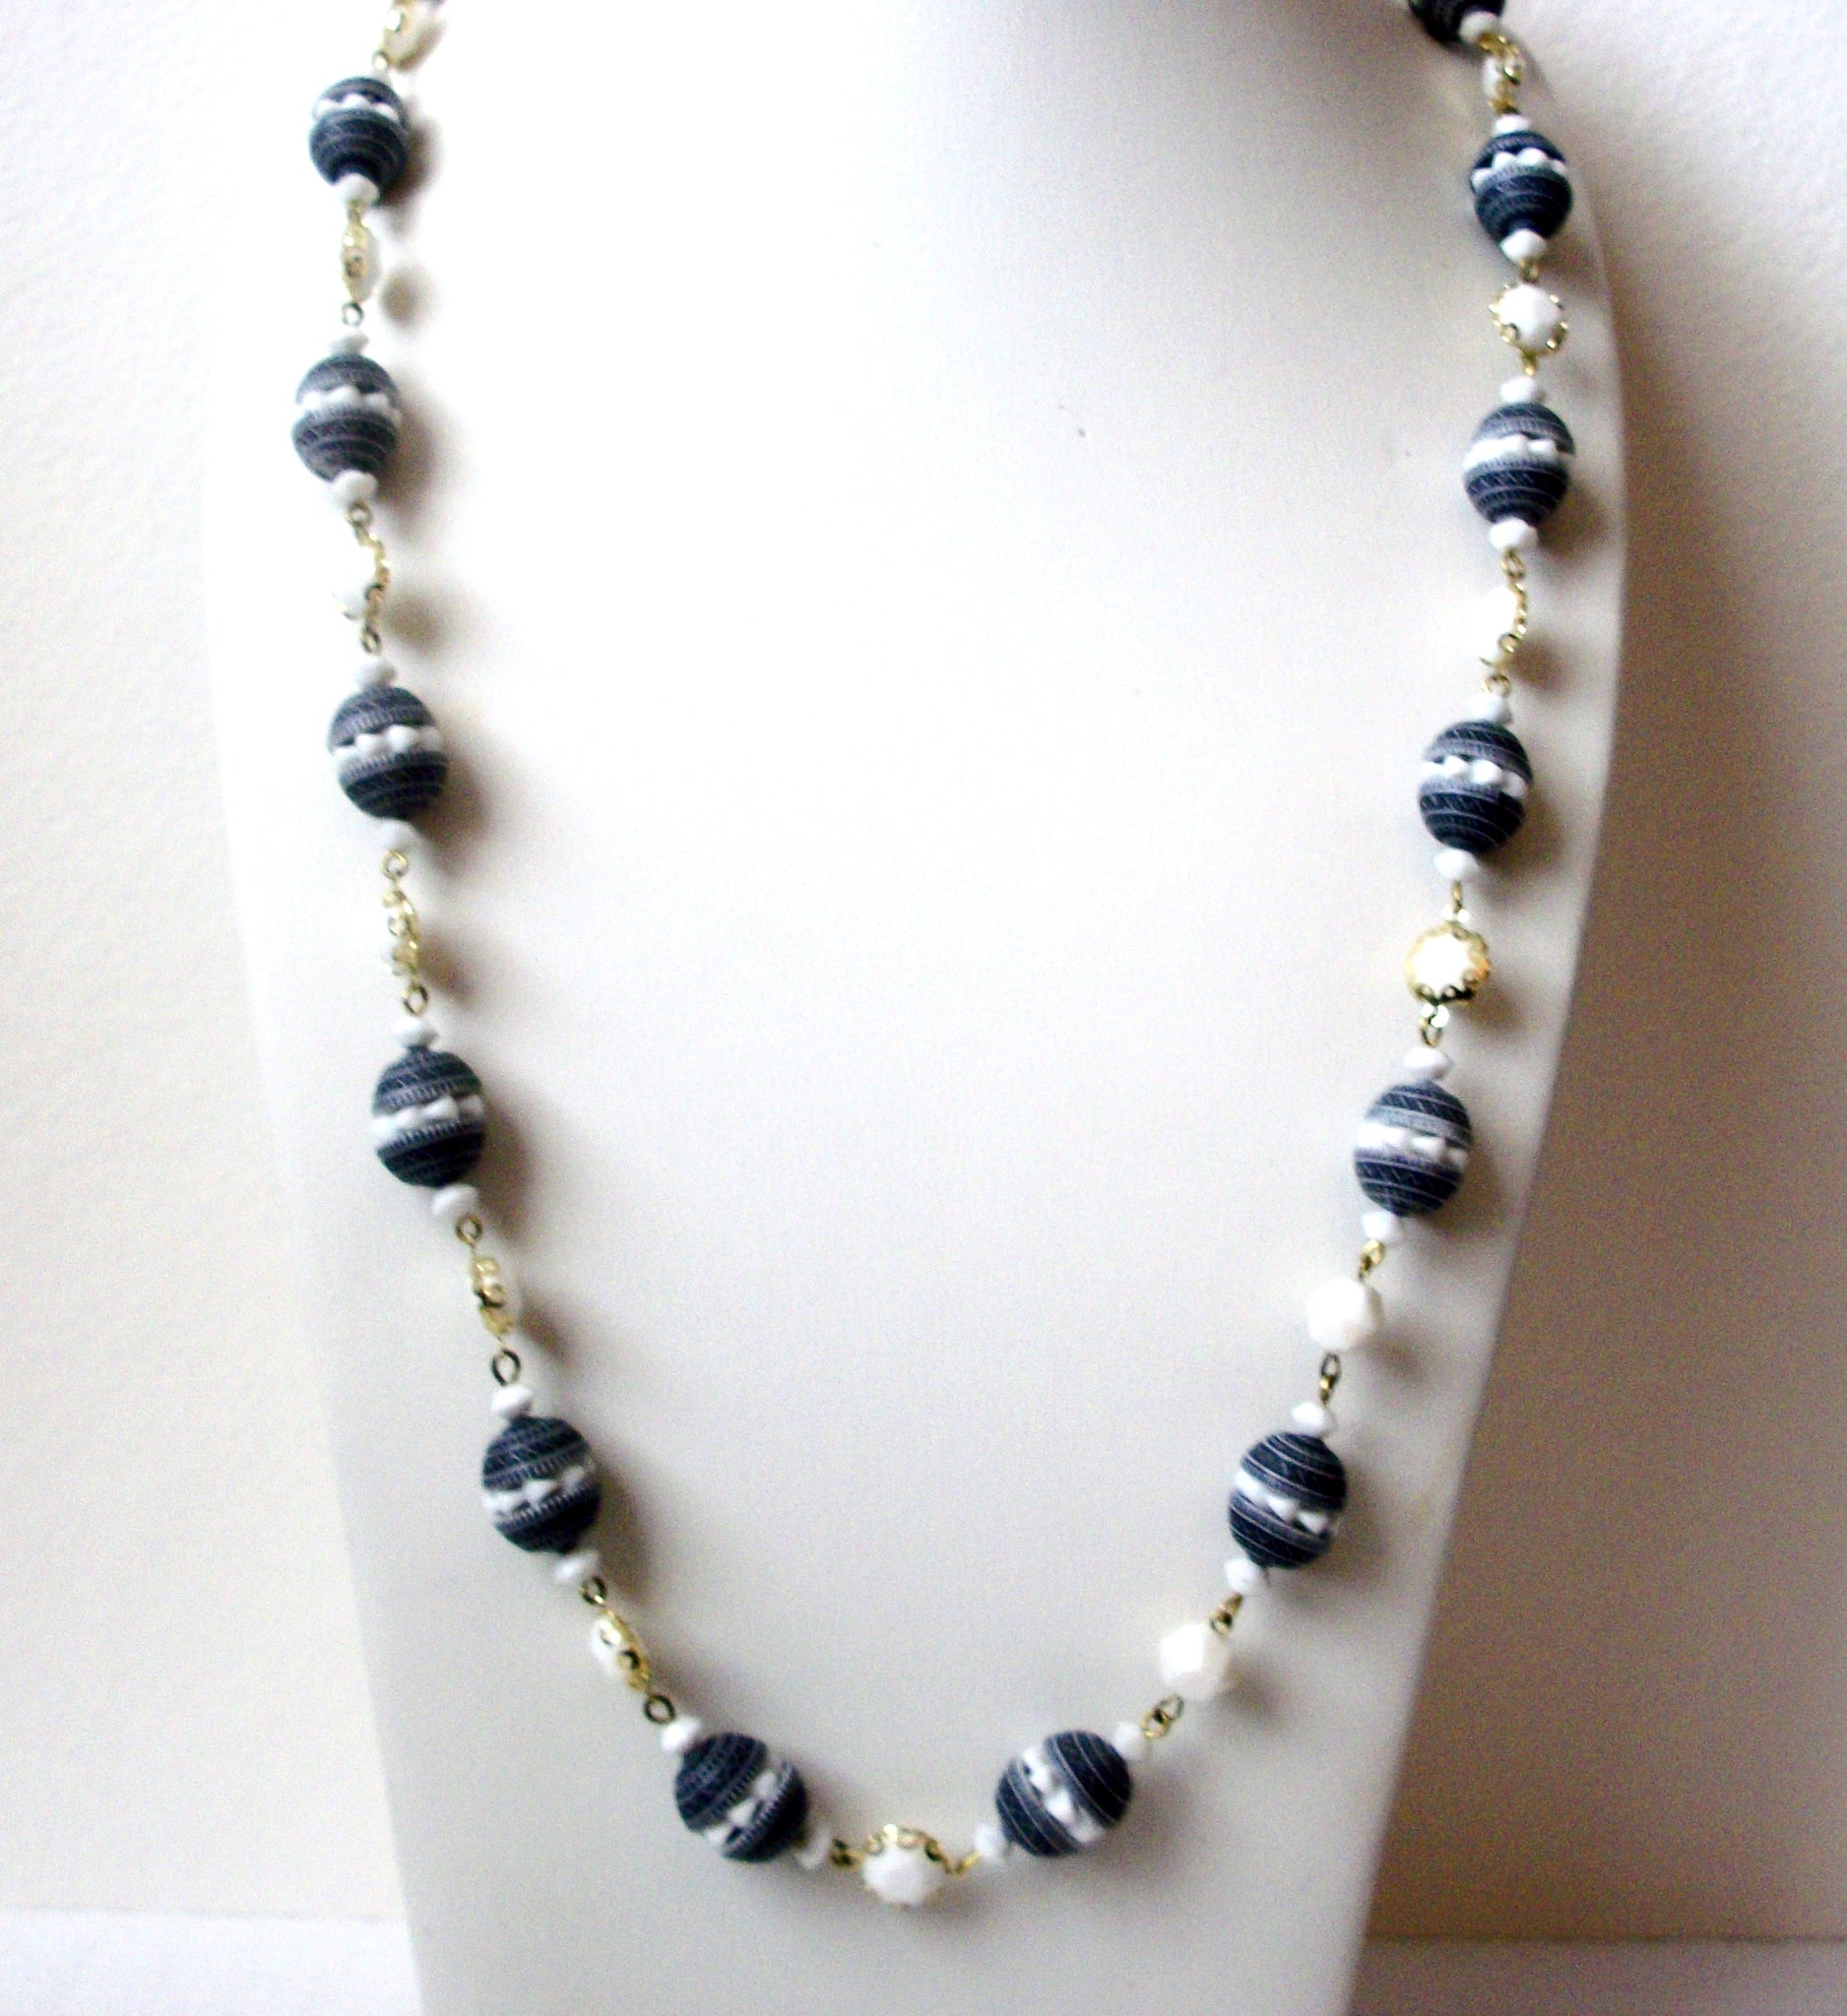 Vintage 1950s Blue White Old Plastic Beads Necklace 112720